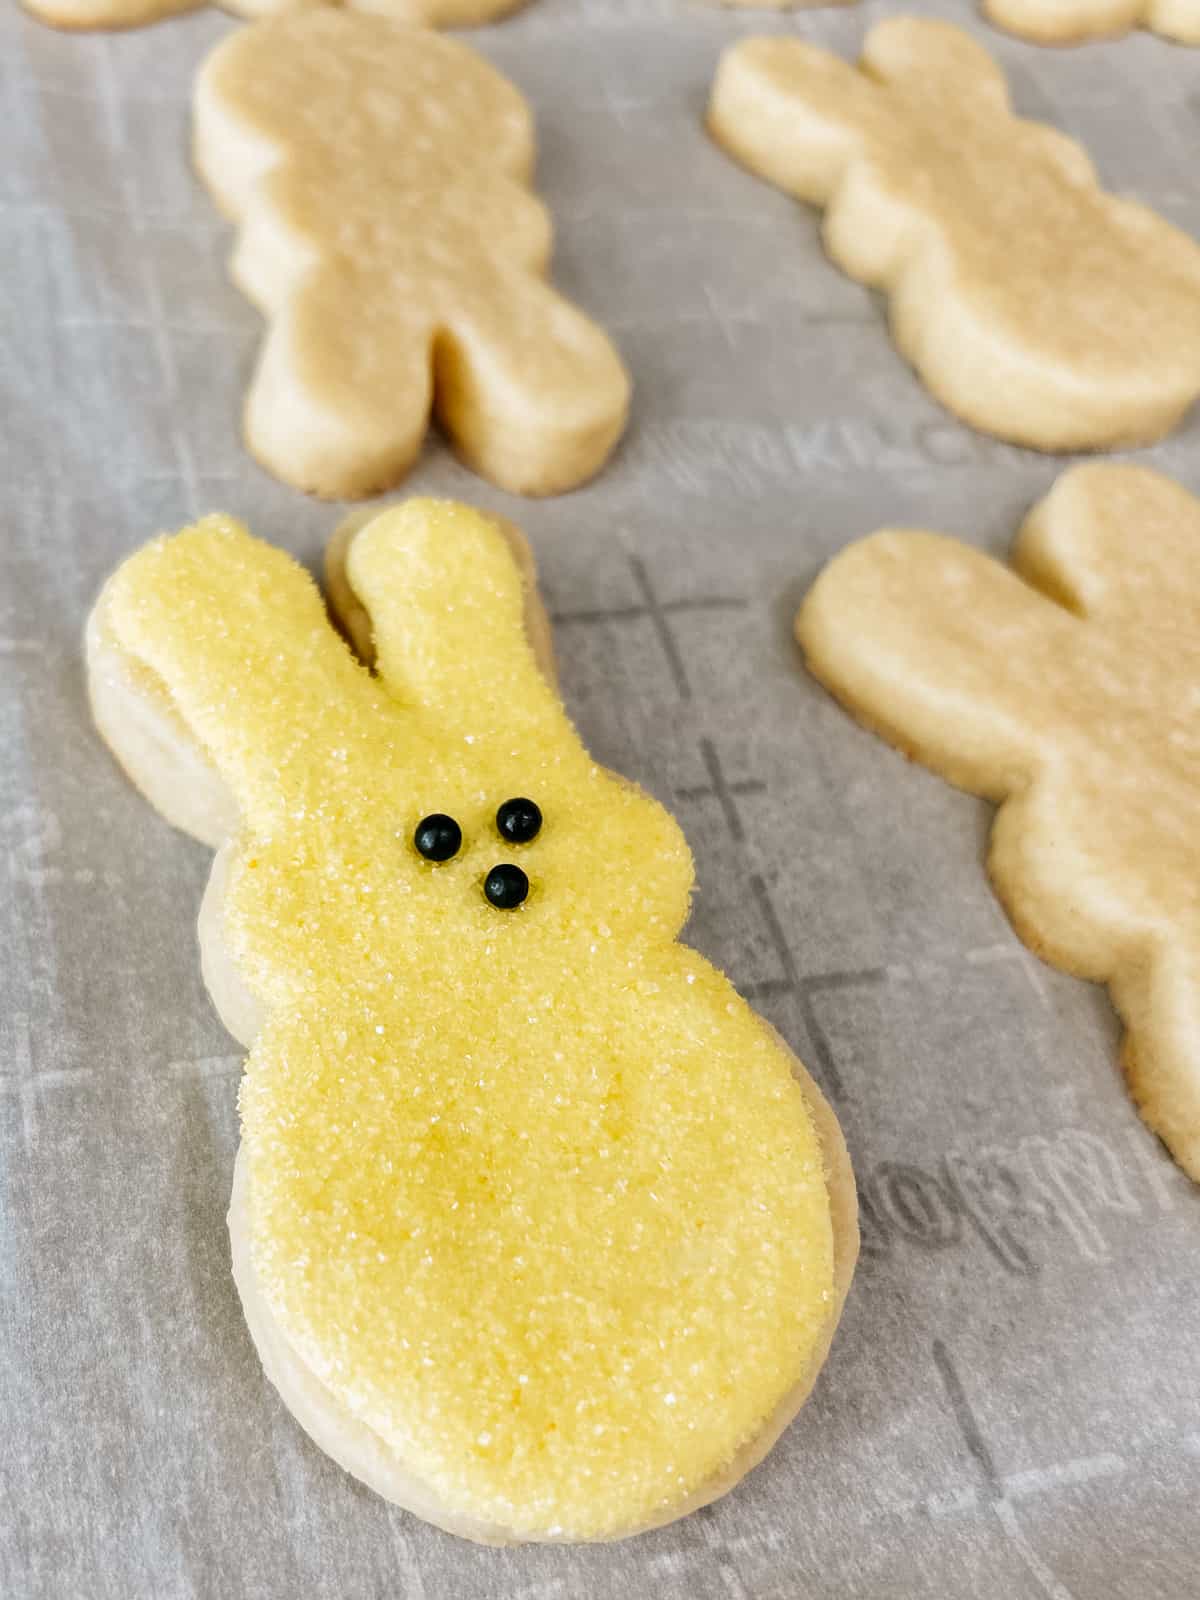 sugar cookies on a baking sheet, one decorated as a peeps sugar cookie with sprinkles.